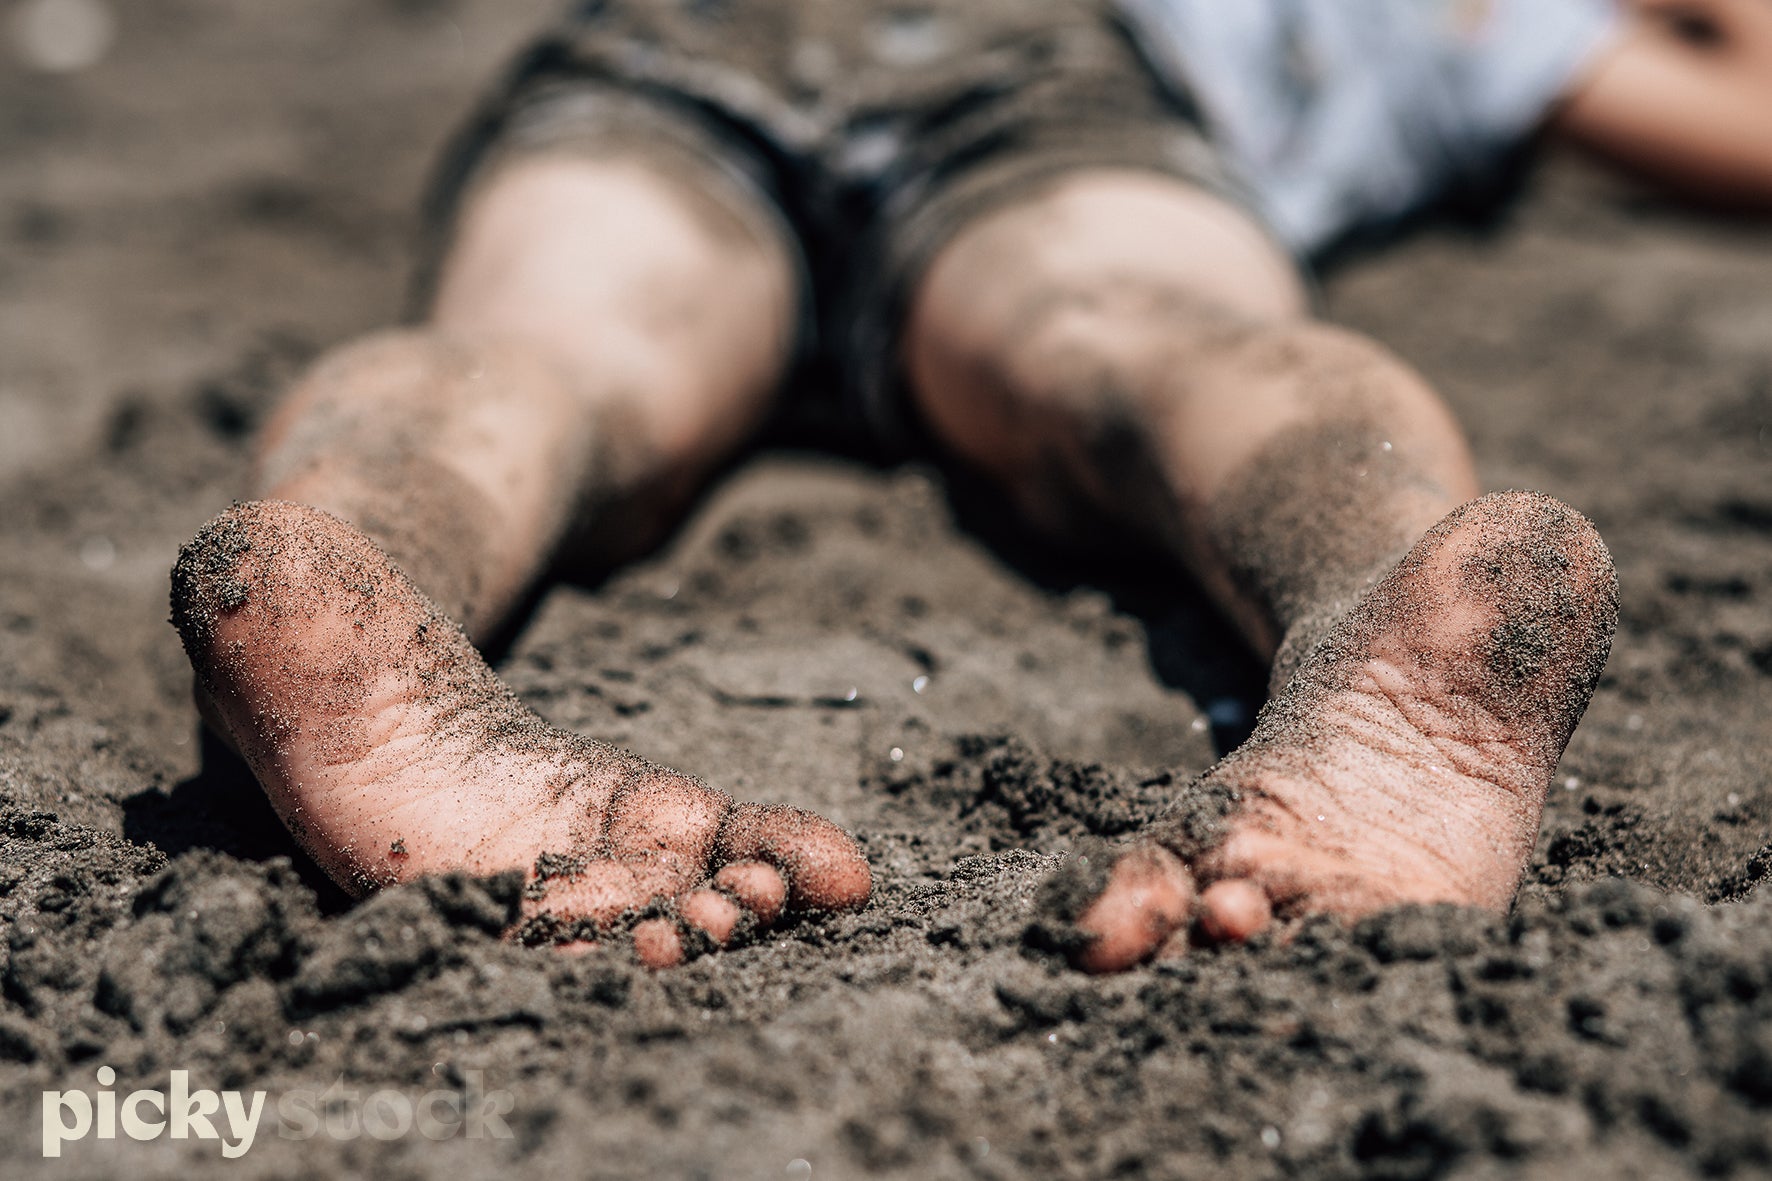 Small kid lying in a black sand beach. Close up of sandy wet small feet. Legs and body out of focus in middle of frame